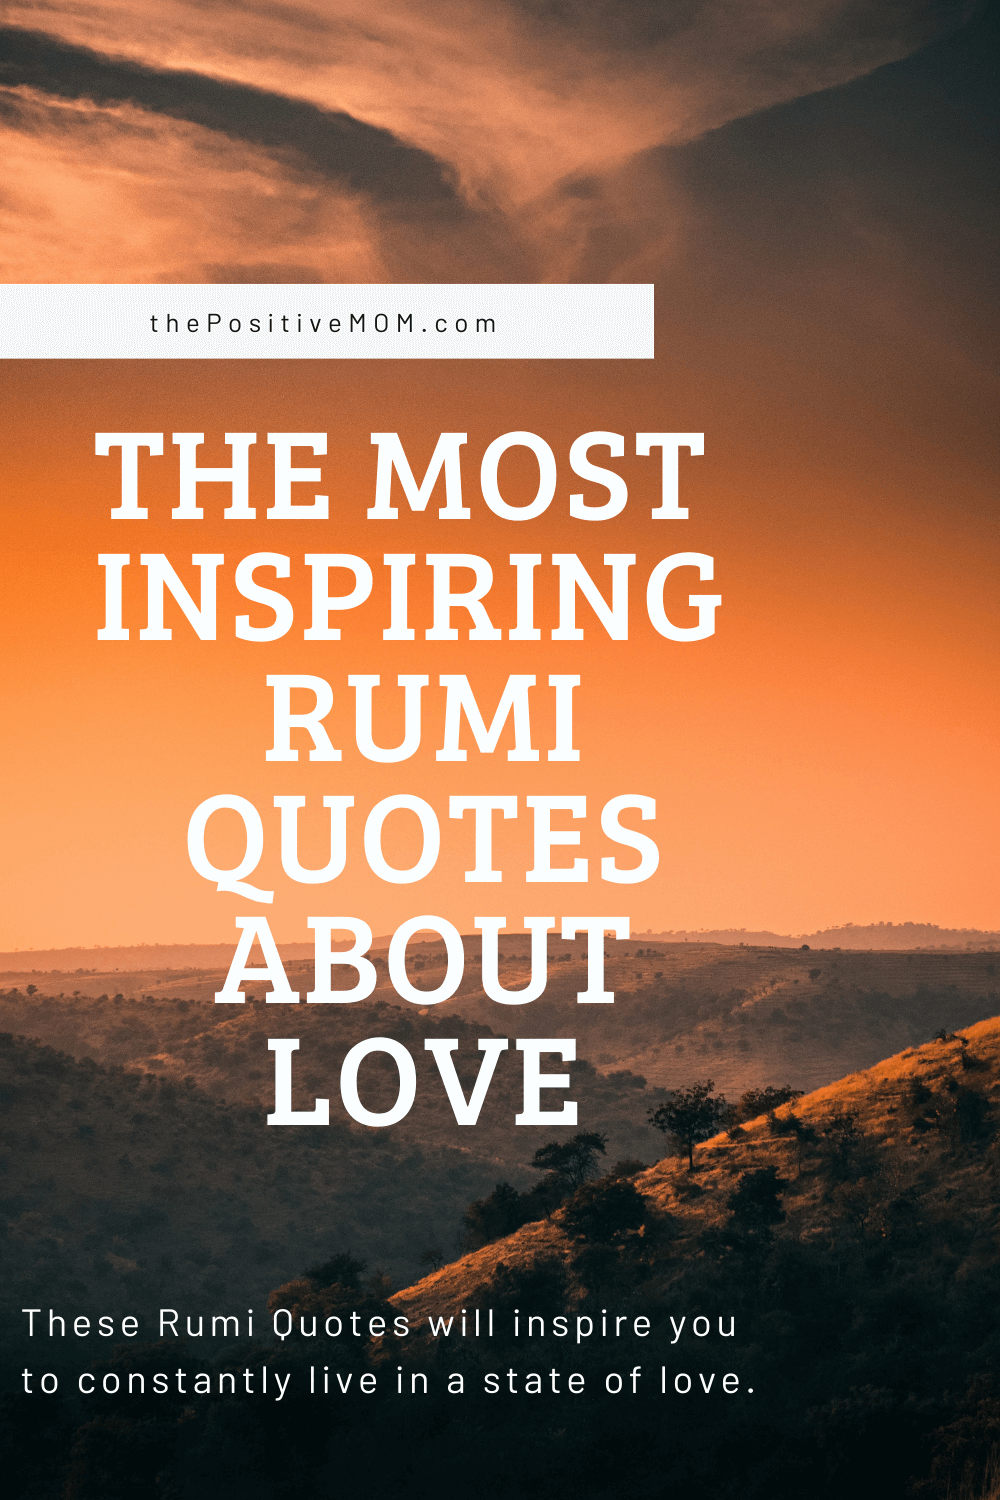 The Most Inspiring Rumi Quotes About Love and Loving